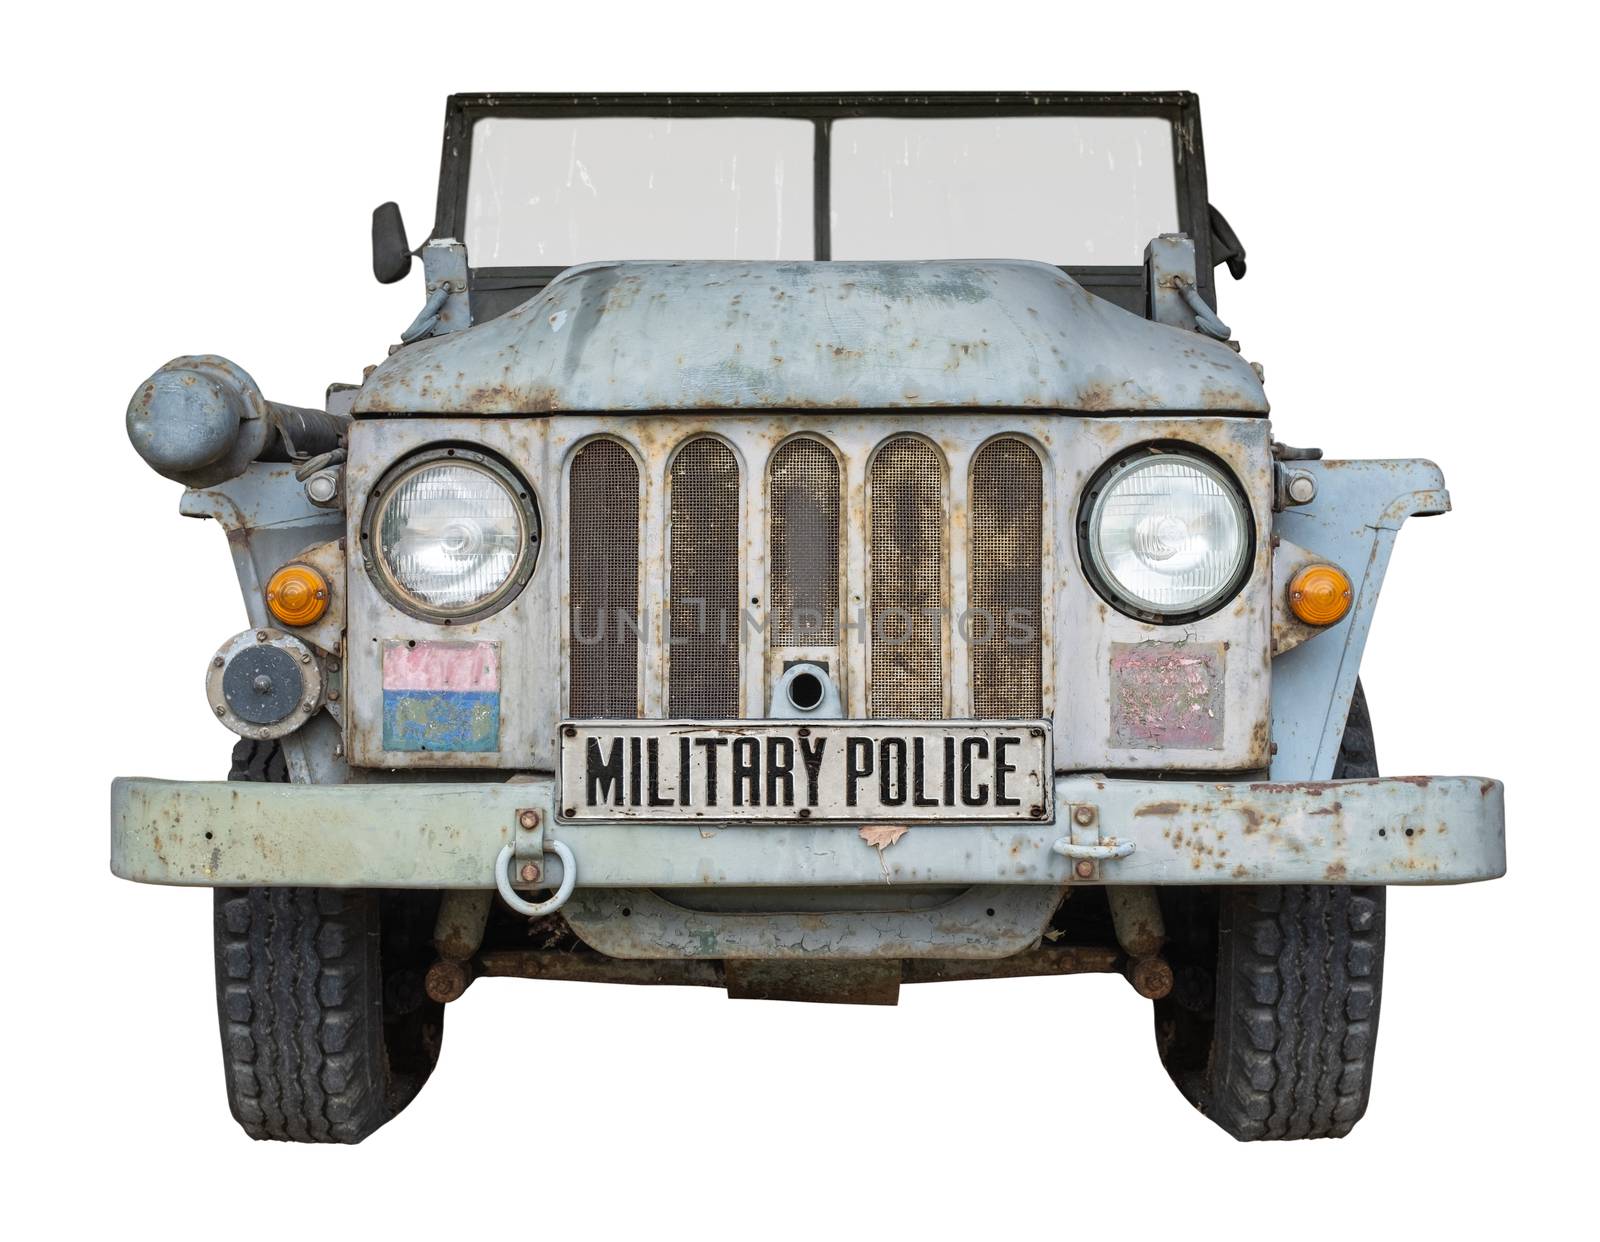 An Isolated World War II Era Military Police Vehicle On A White Background